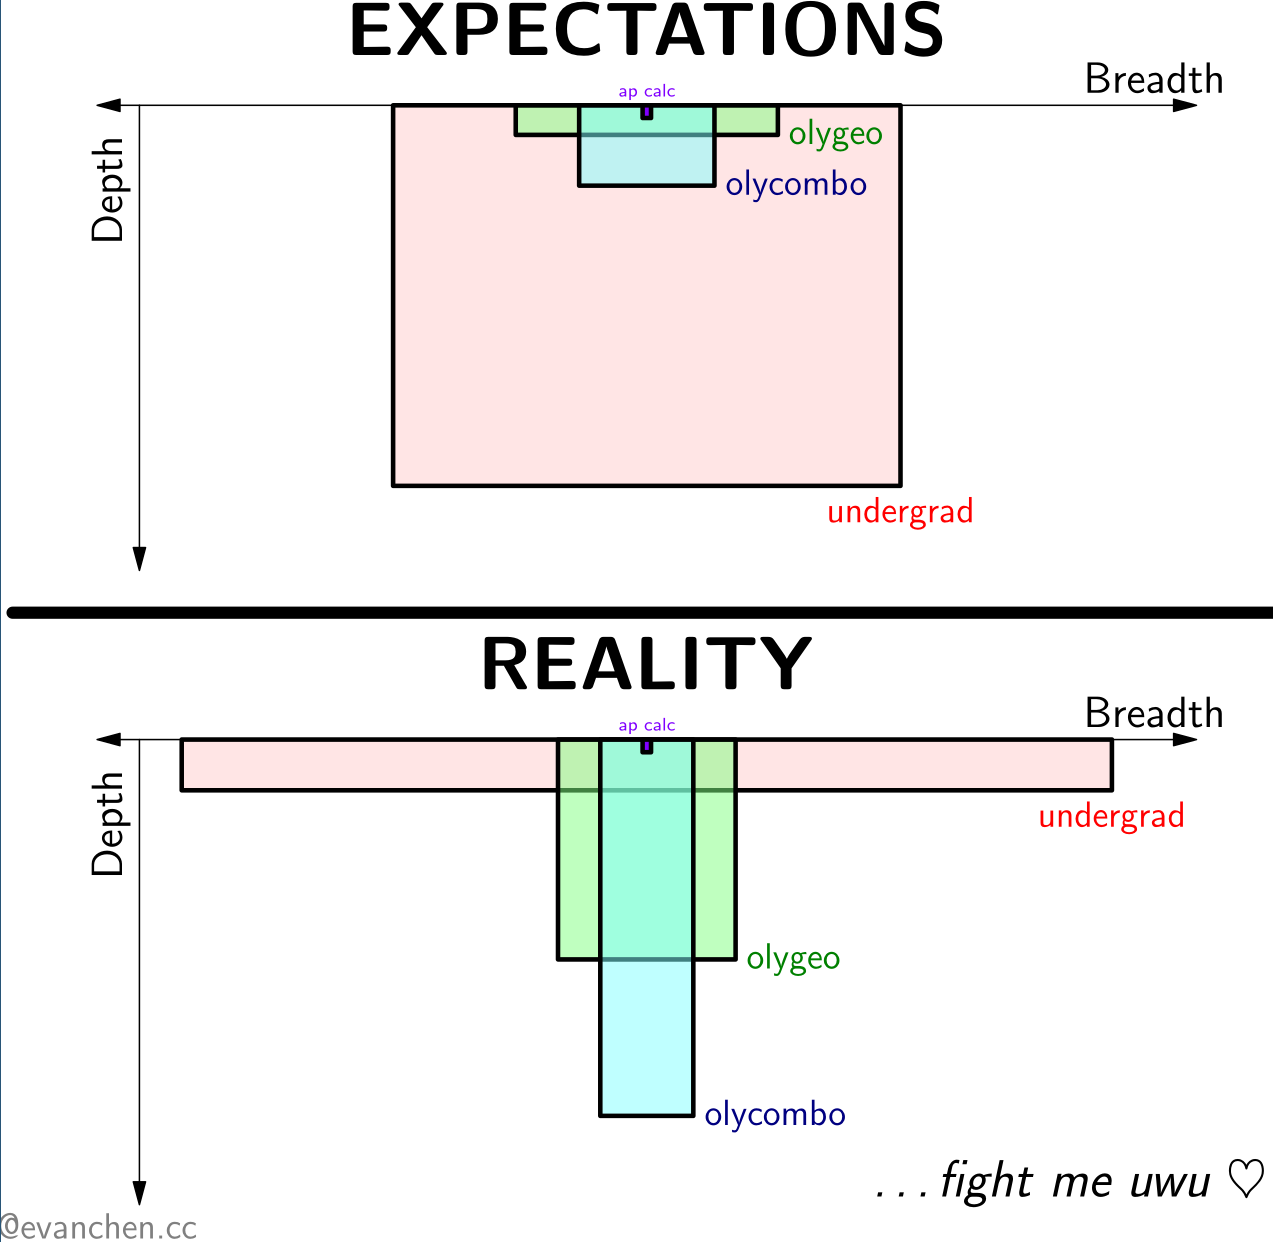 Humorous Instagram photo of expectations vs reality for contest math and undergrad math.